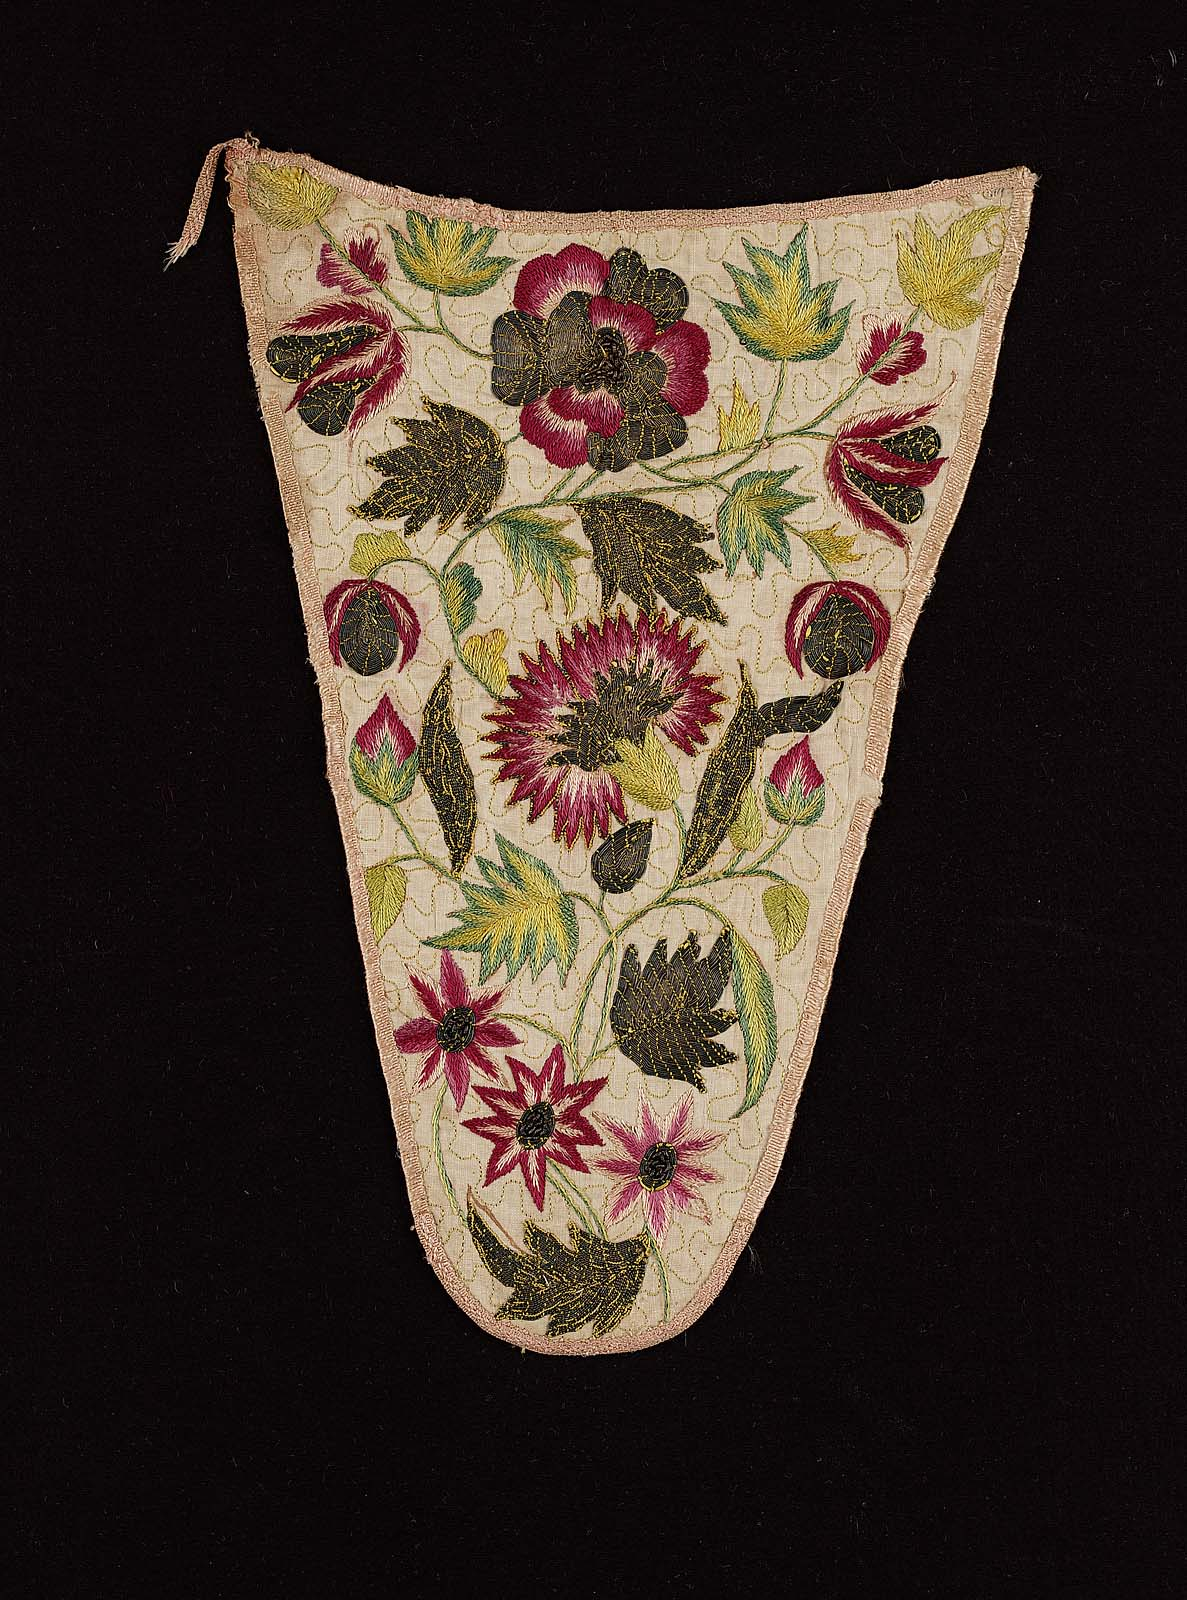 18Th Century Embroidery Patterns Embroidered Stomachers Of The Early 18th Century American Duchess